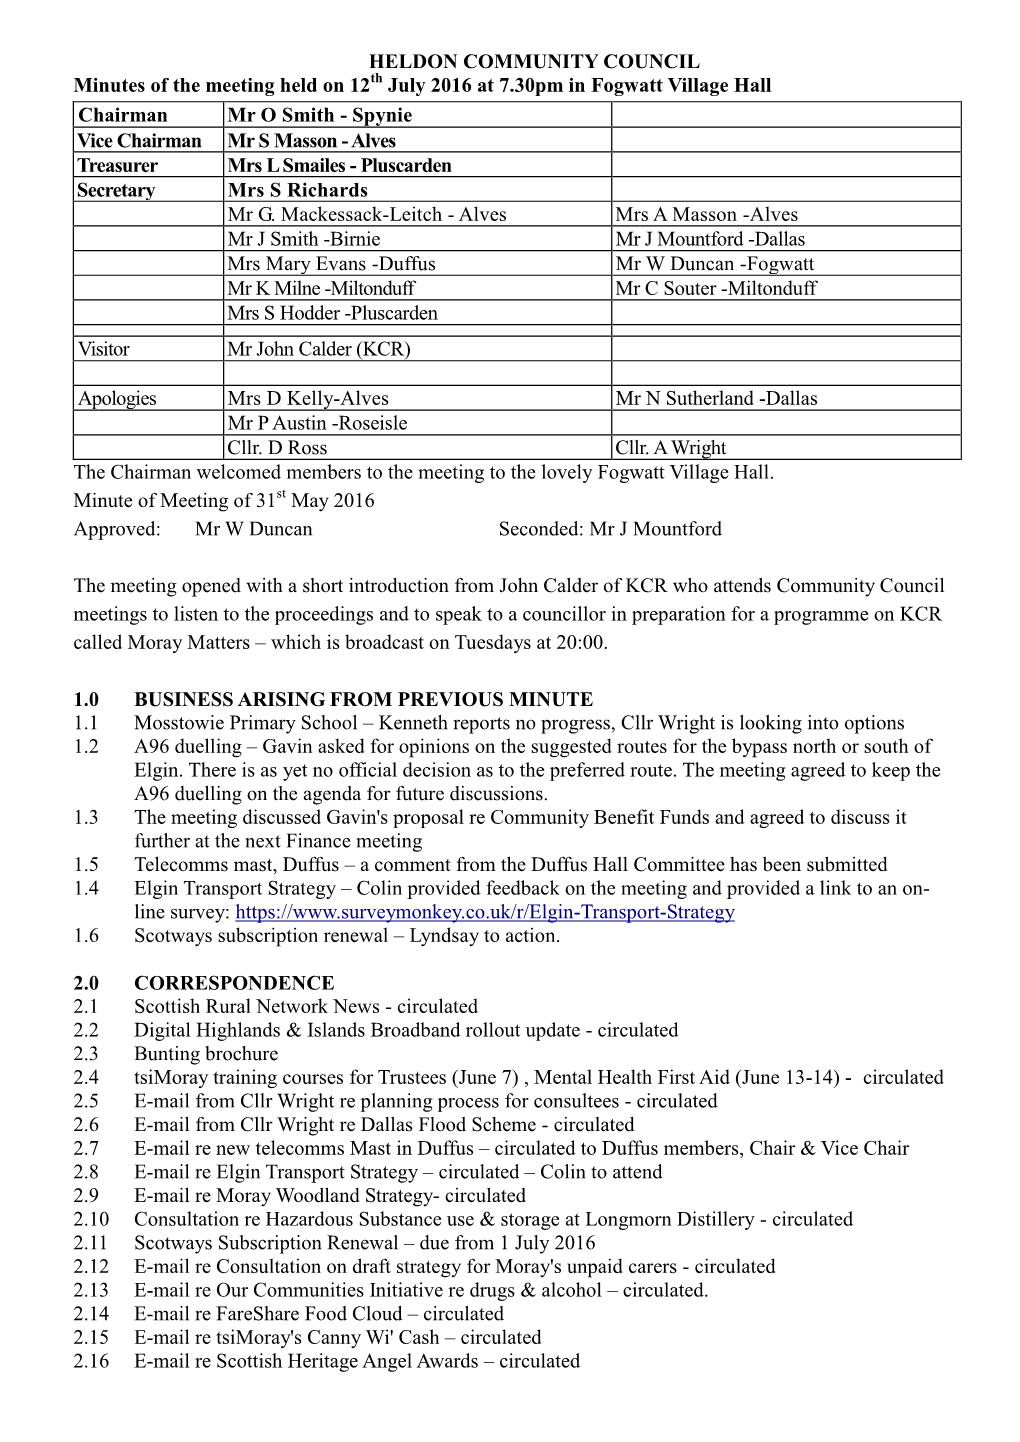 HELDON COMMUNITY COUNCIL Minutes of The